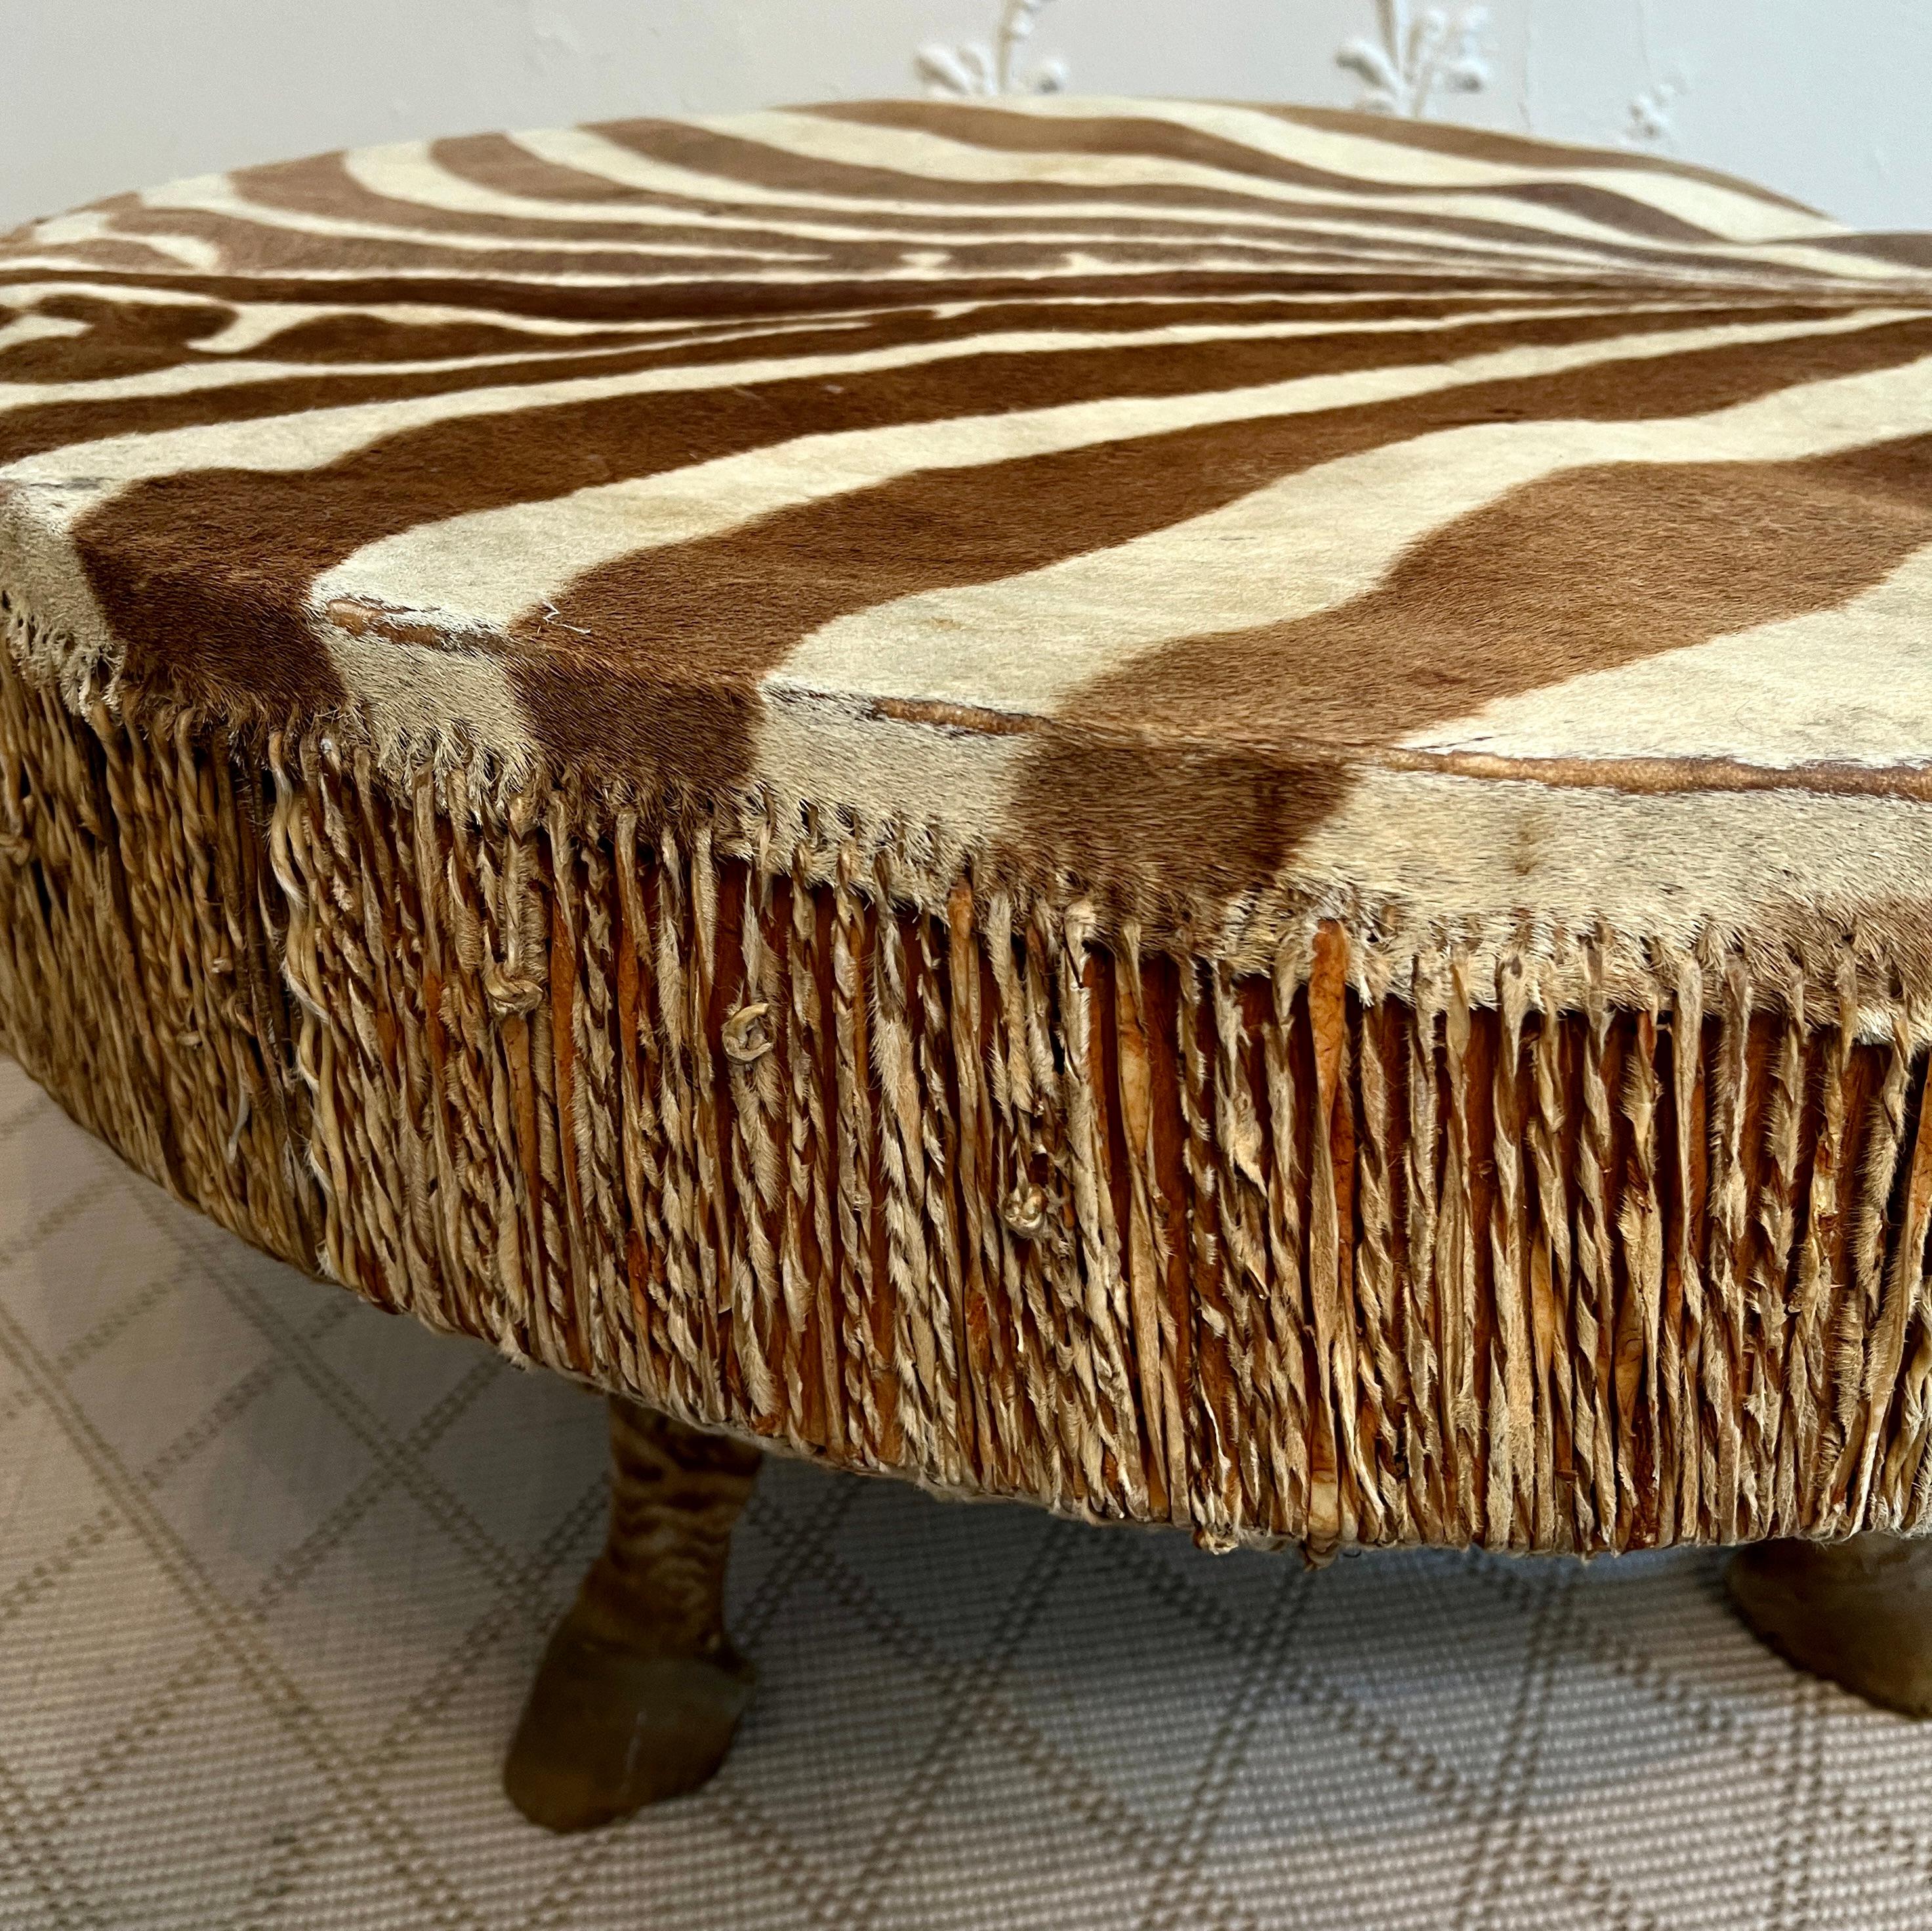 20th Century African Zebra Drum Table with Three Zebra Legs from Ghana For Sale